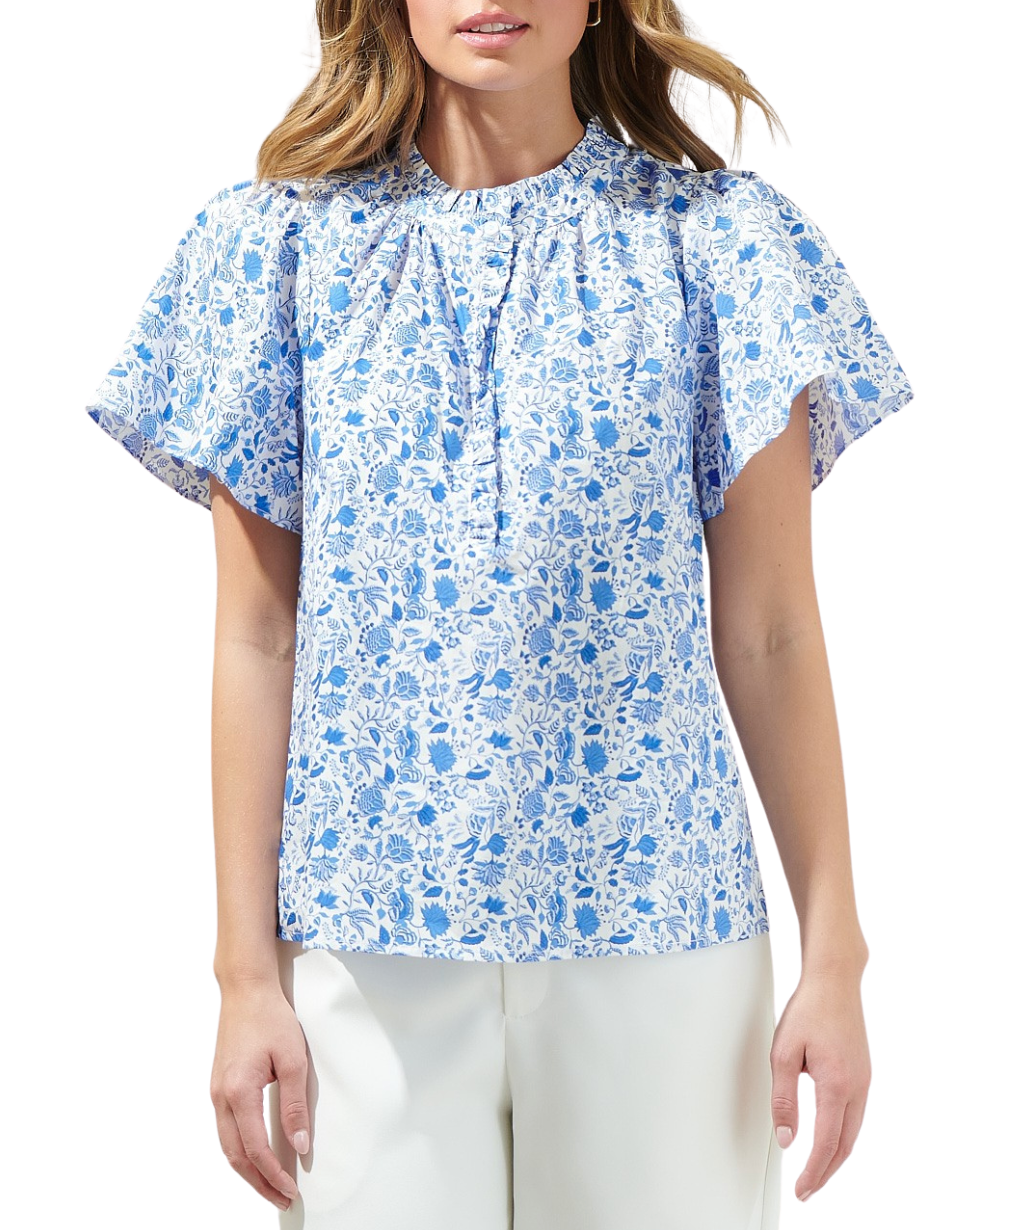 Luray Floral Lily Ruffle Blouse - Blue/White